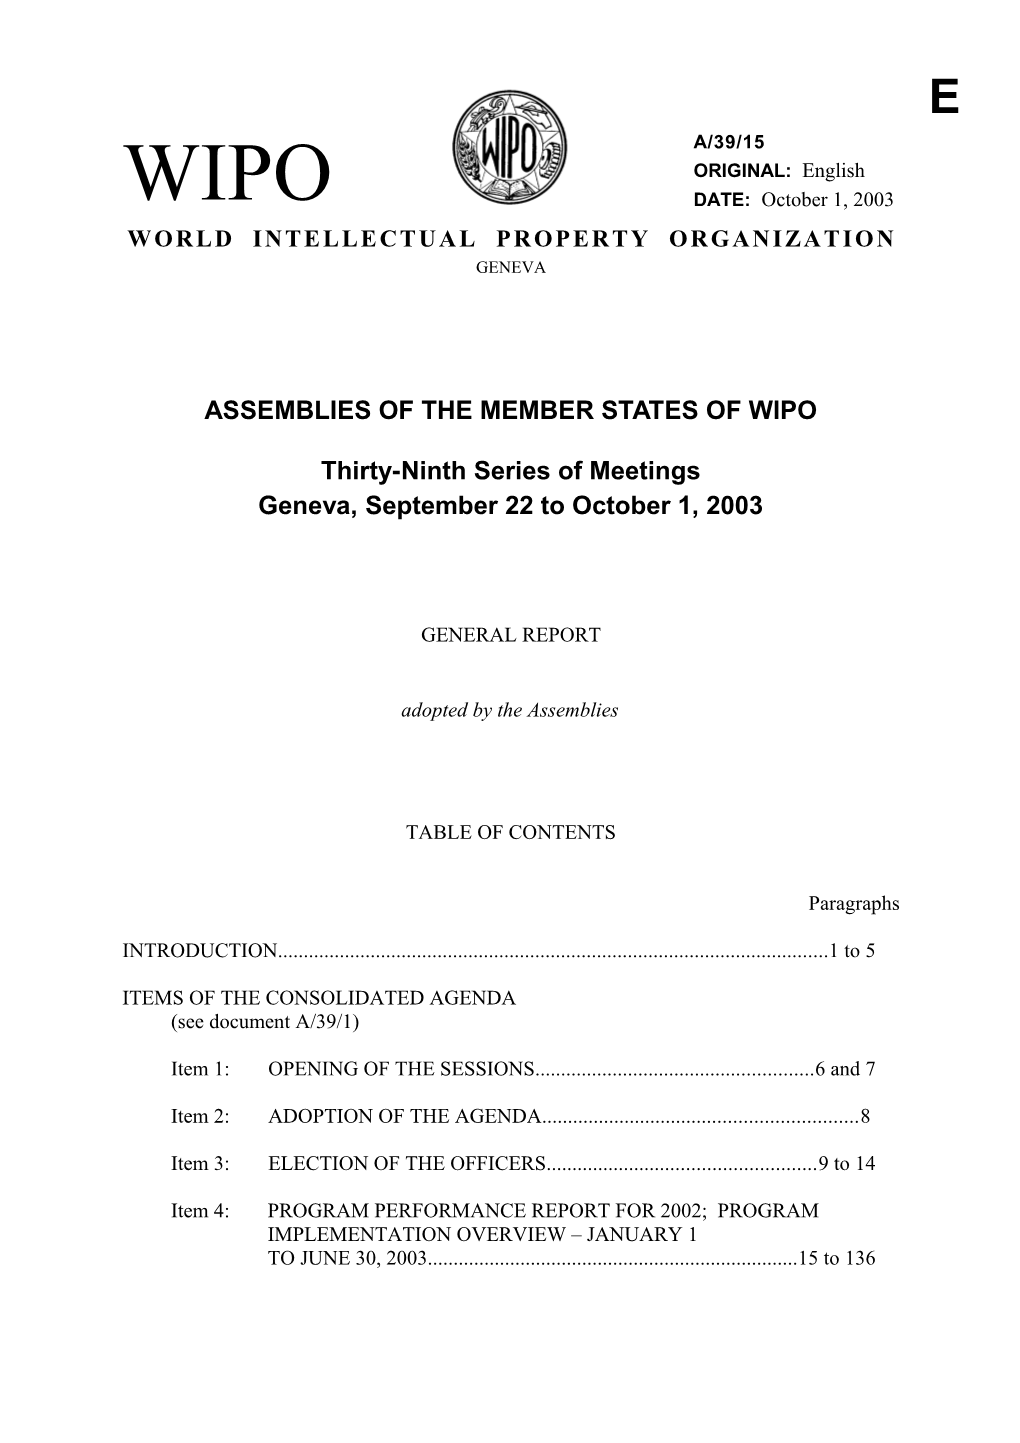 Assemblies of the Member States of Wipo s3